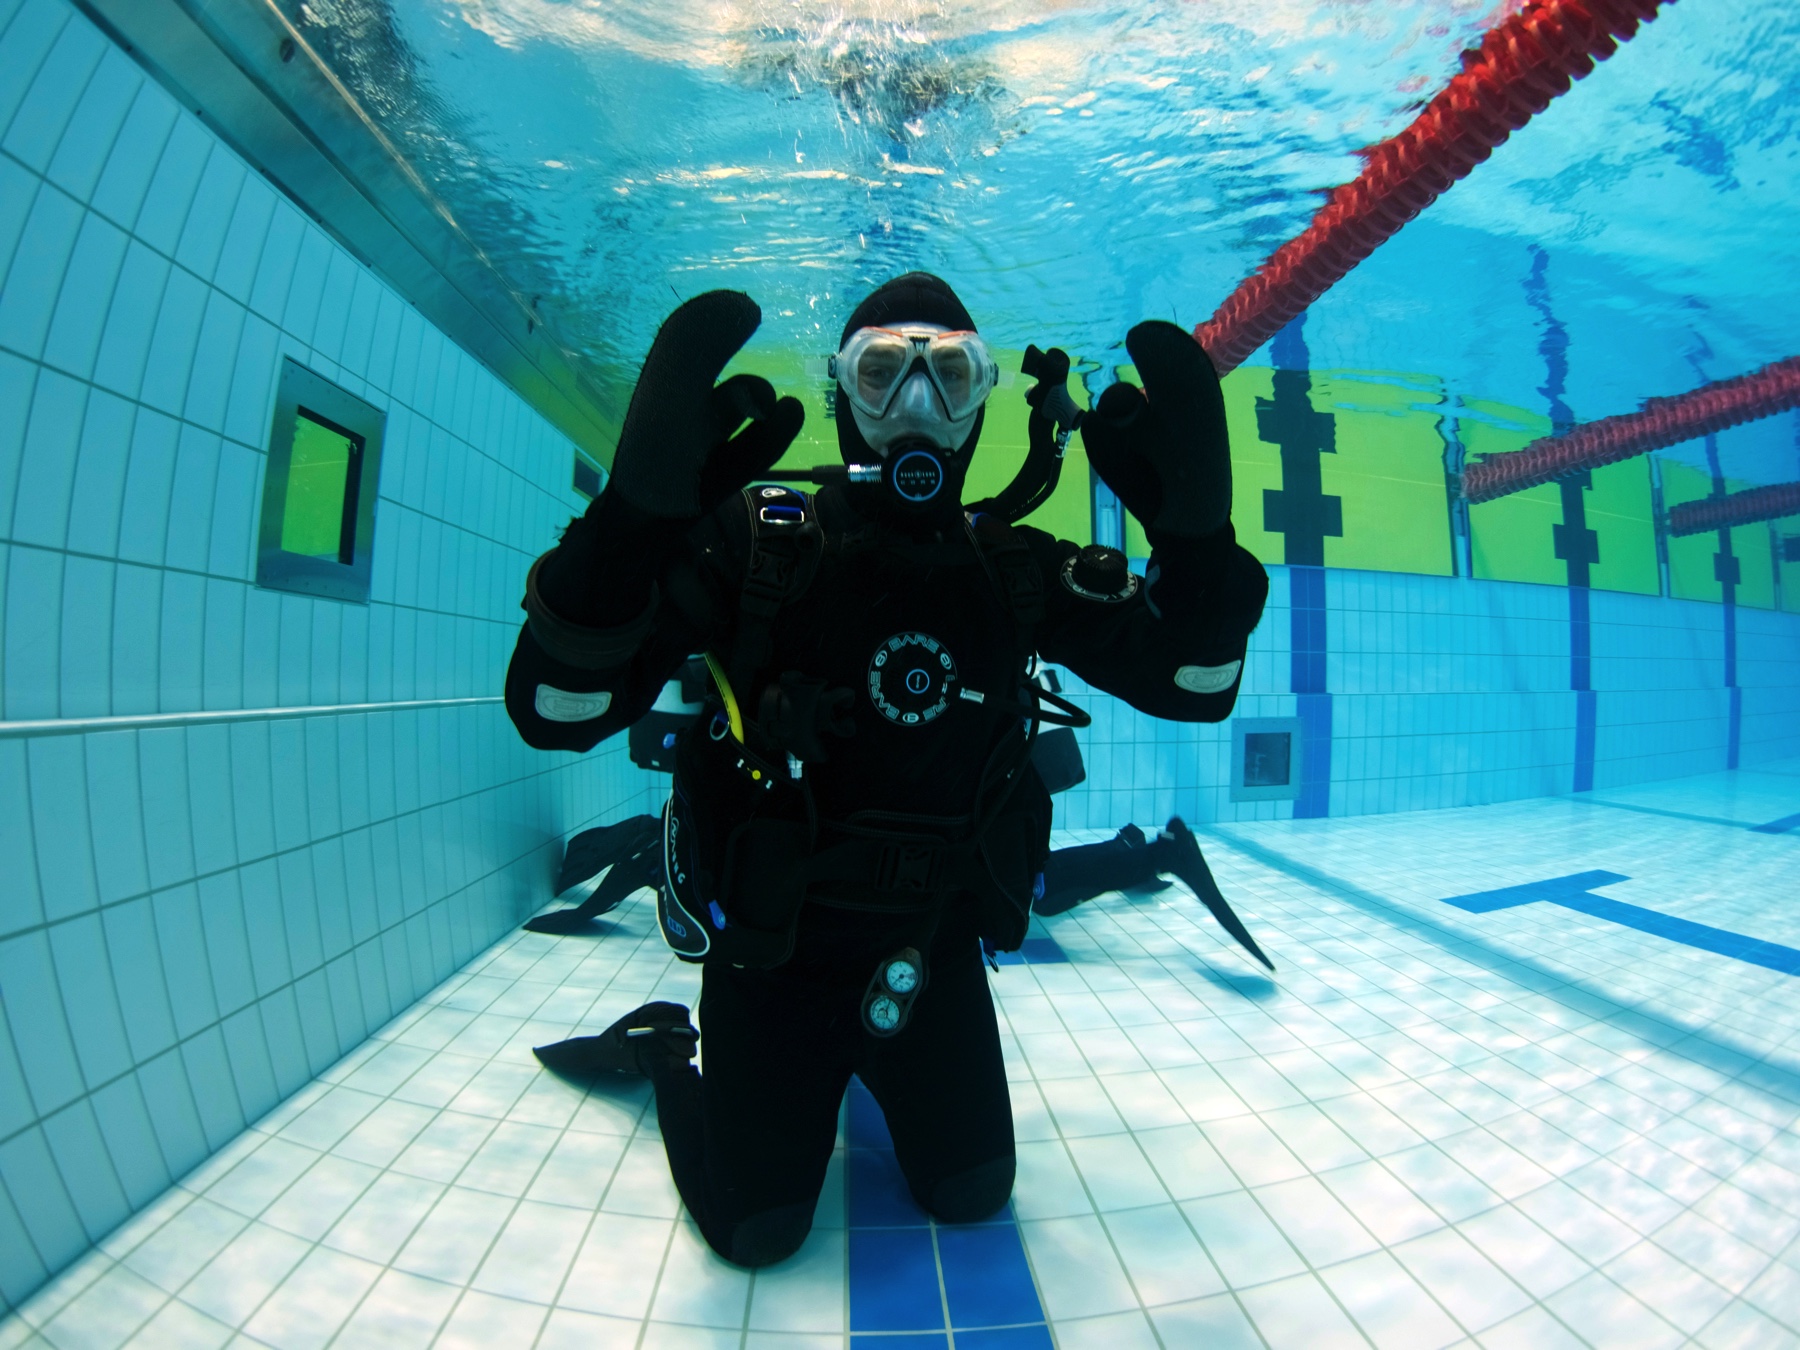 PADI Dry Suit Course & Silfra Diving Tour in 2 Days -  - Iceland